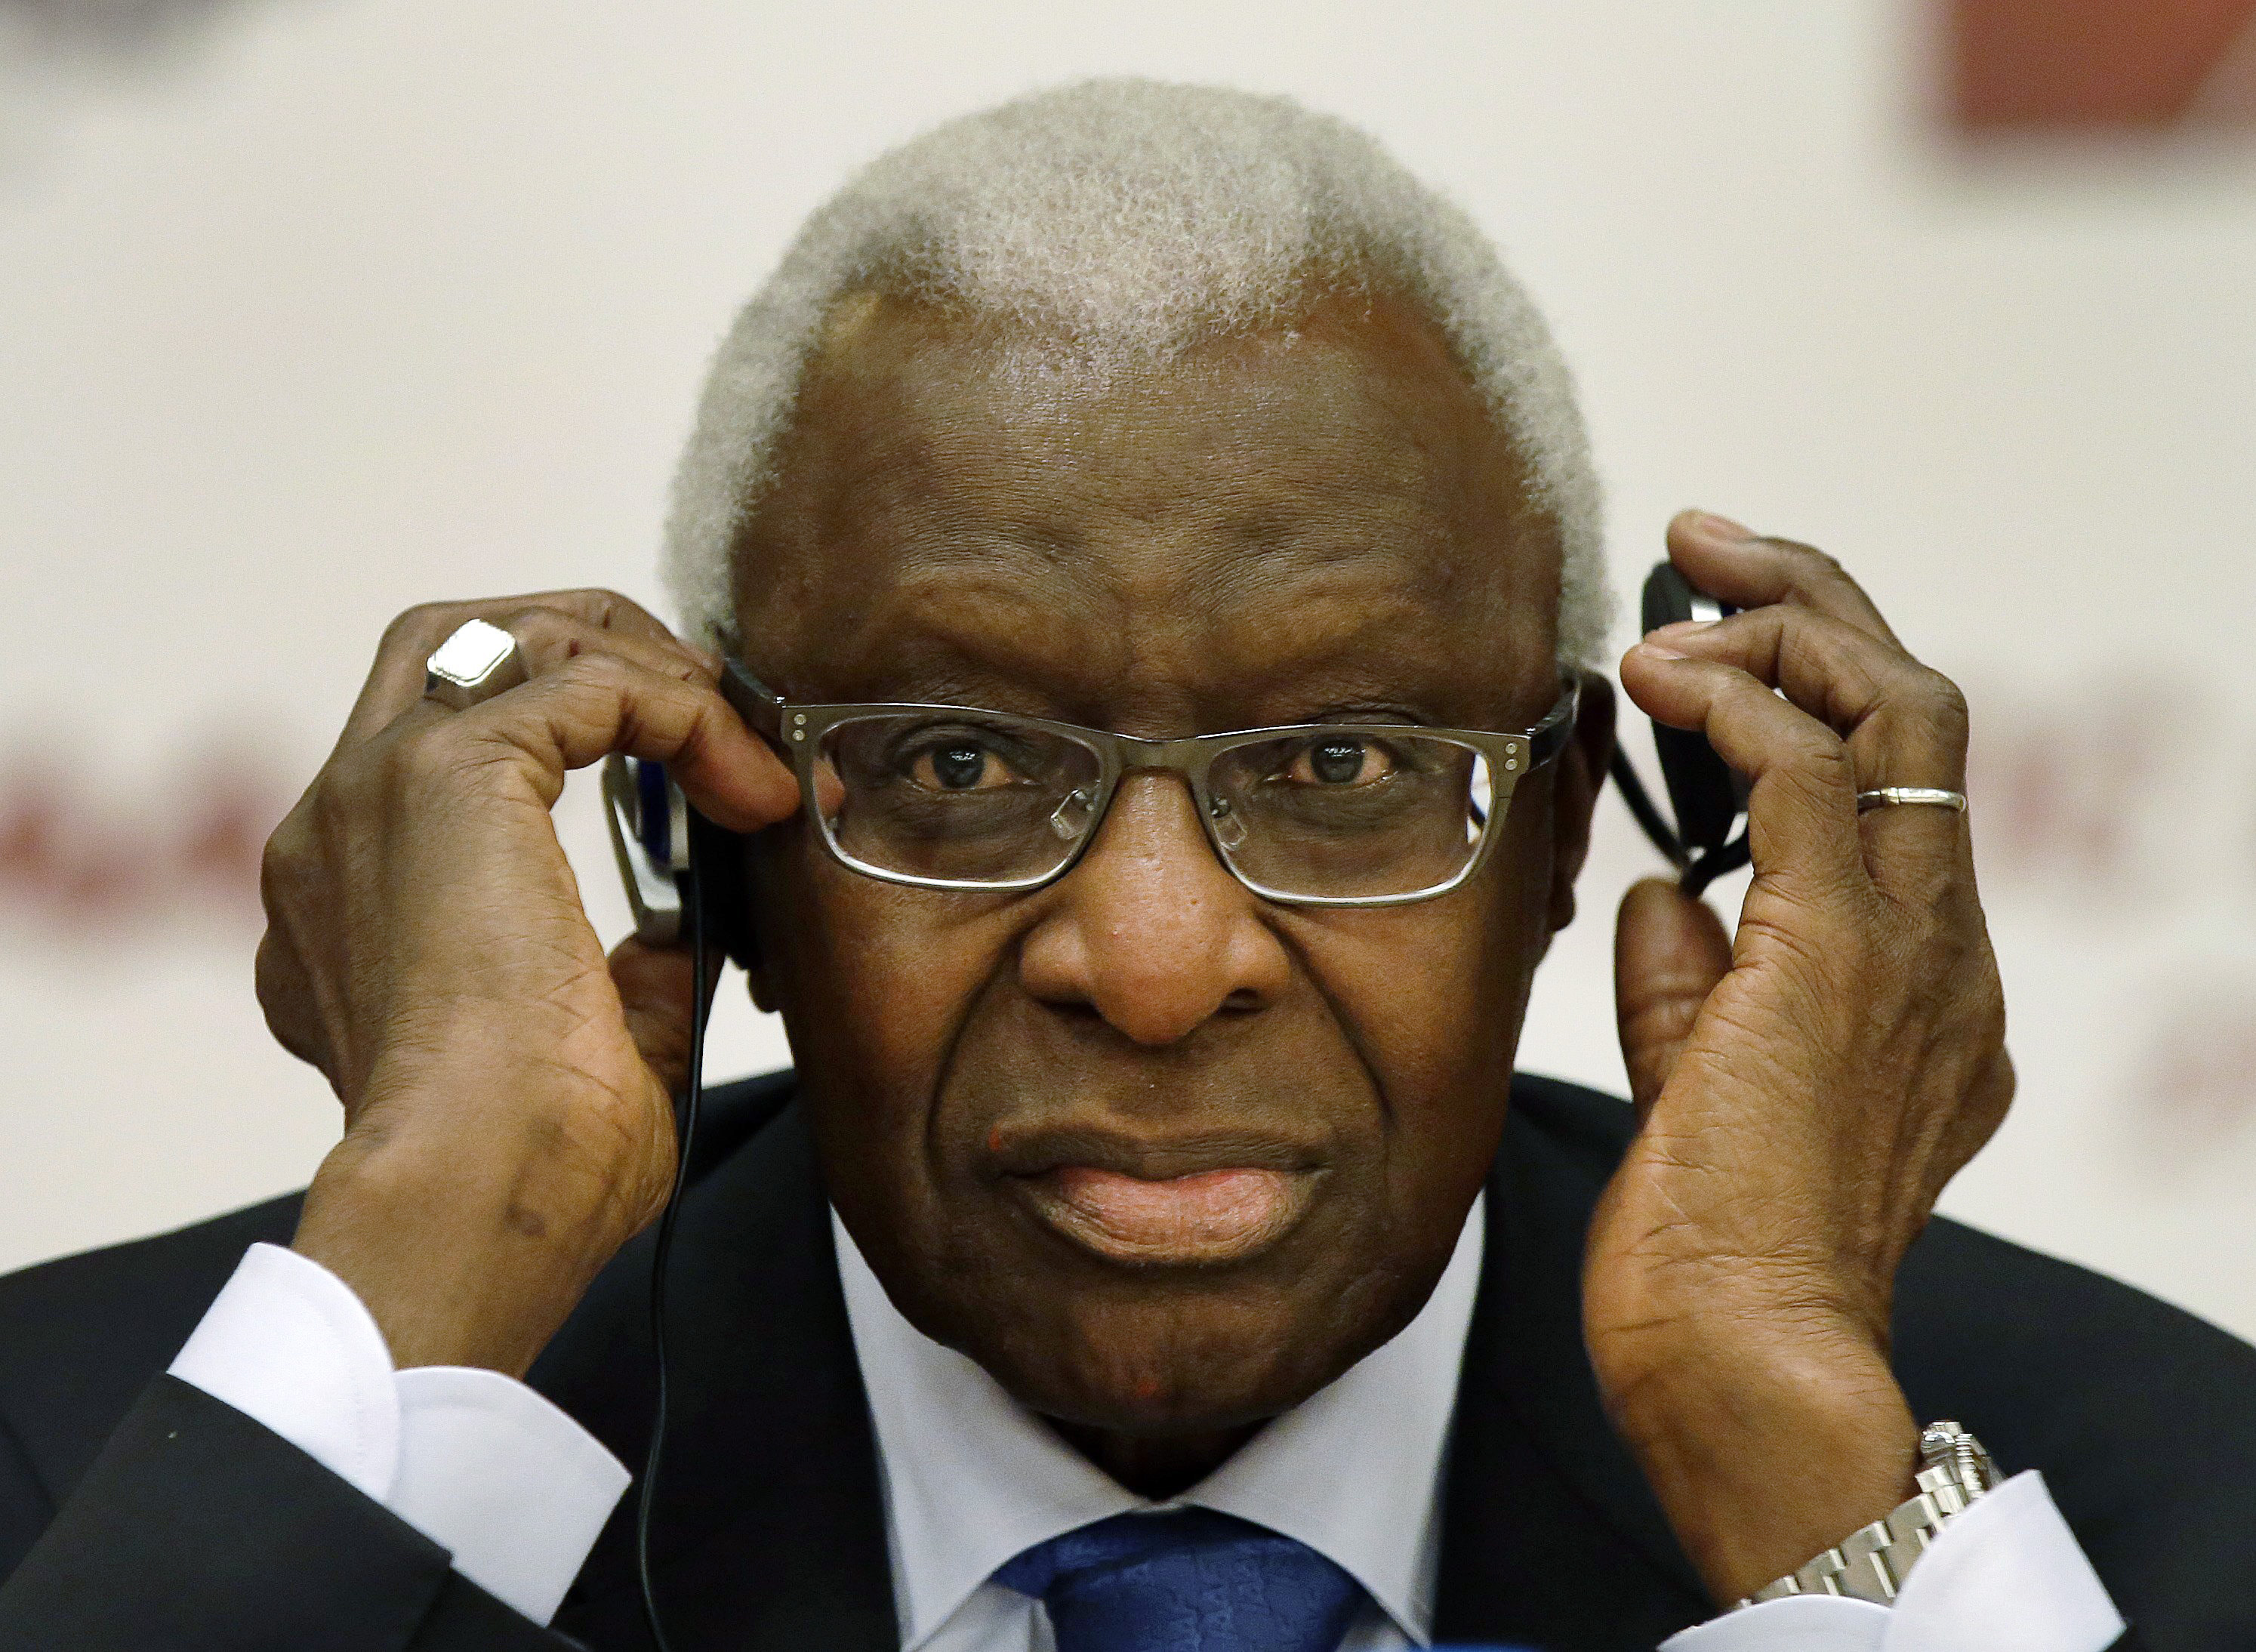 FILE - In this Aug. 21, 2015 file photo IAAF president Lamine Diack adjusts his headphones during a joint IOC and IAAF press conference on the side of the World Athletic Championships in Beijing. IOC ethics panel recommends provisional suspension of Lamine Diack as honorary member, Monday, Nov. 9, 2015. (AP Photo/Kin Cheung, file)